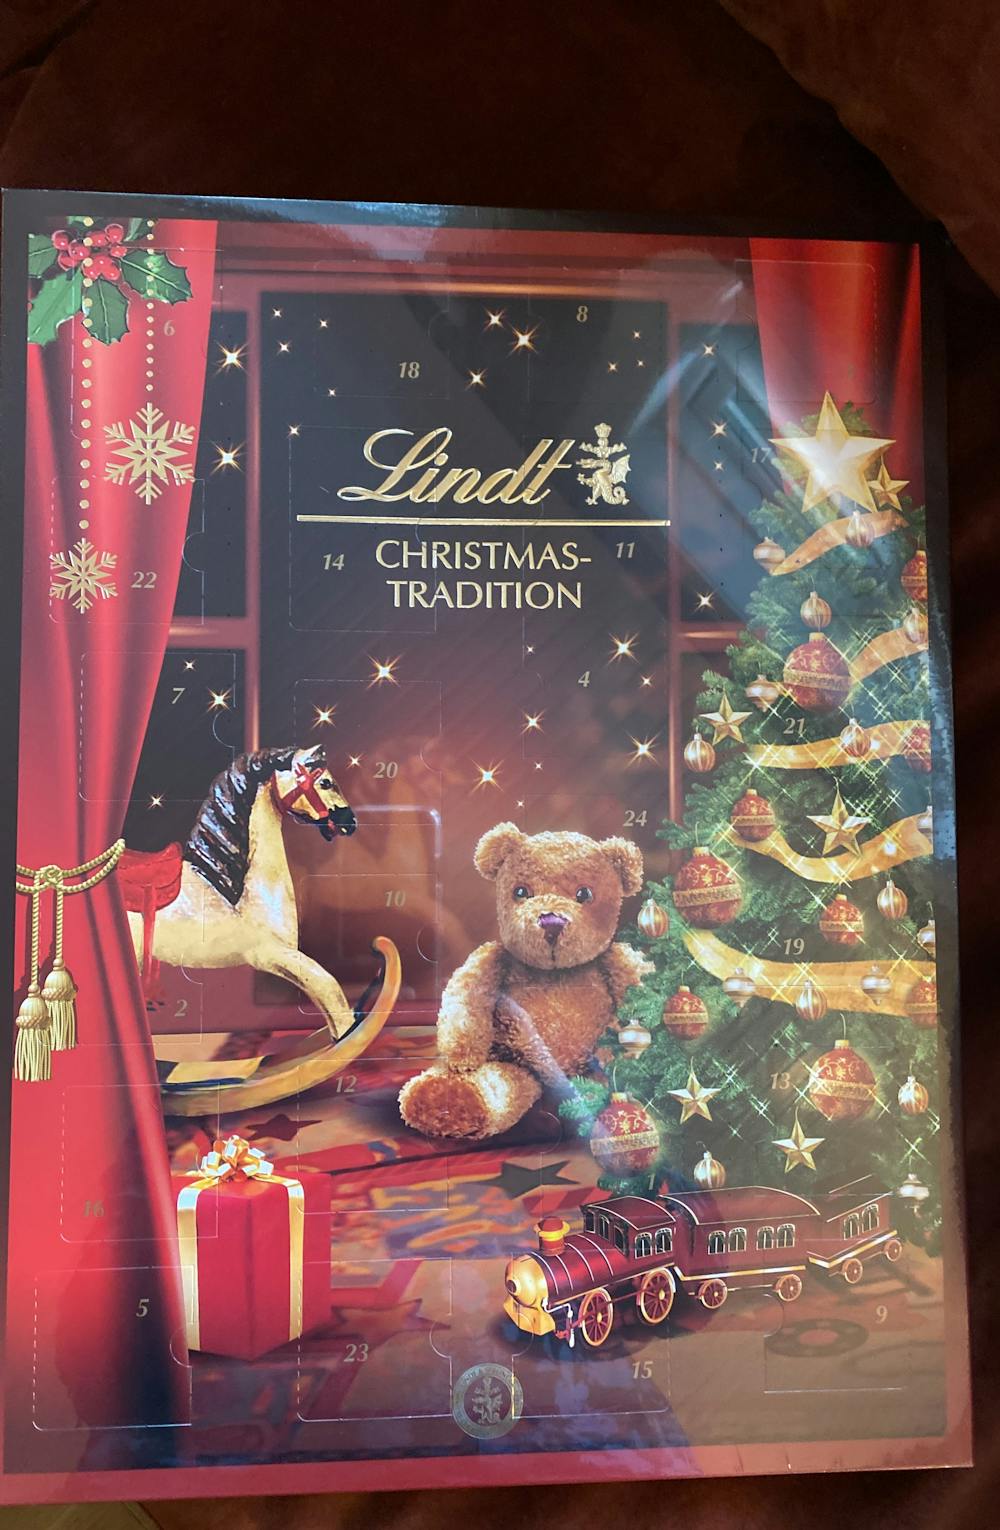 Christmas tradition, Lindt